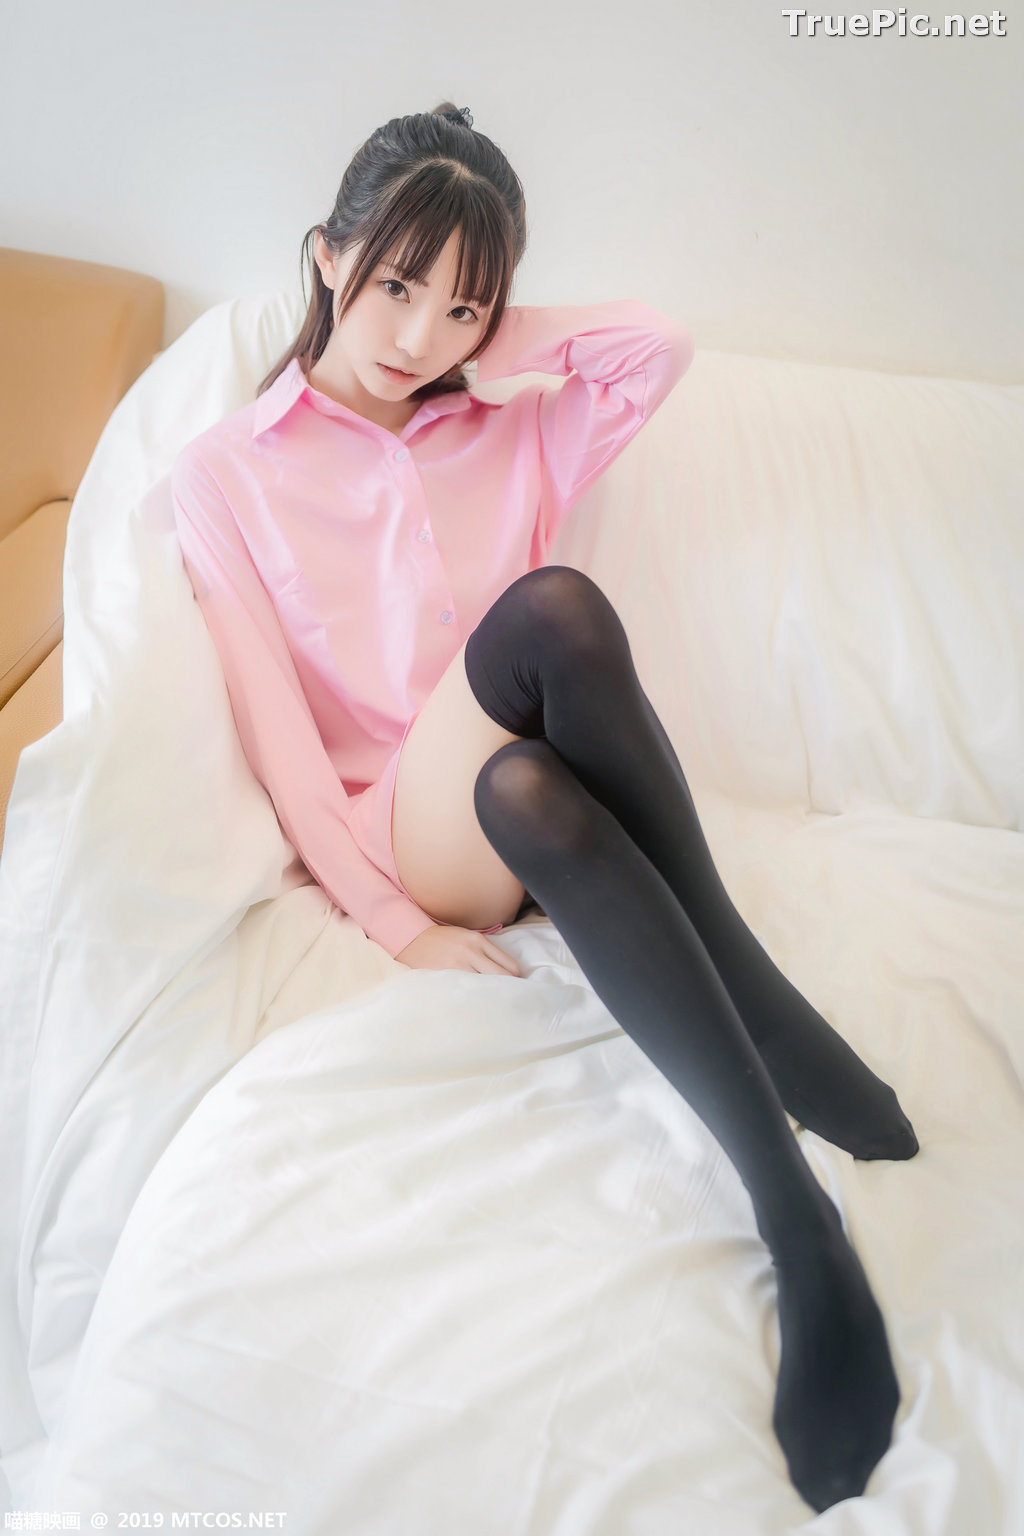 Image [MTCos] 喵糖映画 Vol.022 – Chinese Model – Pink Shirt and Black Stockings - TruePic.net - Picture-35